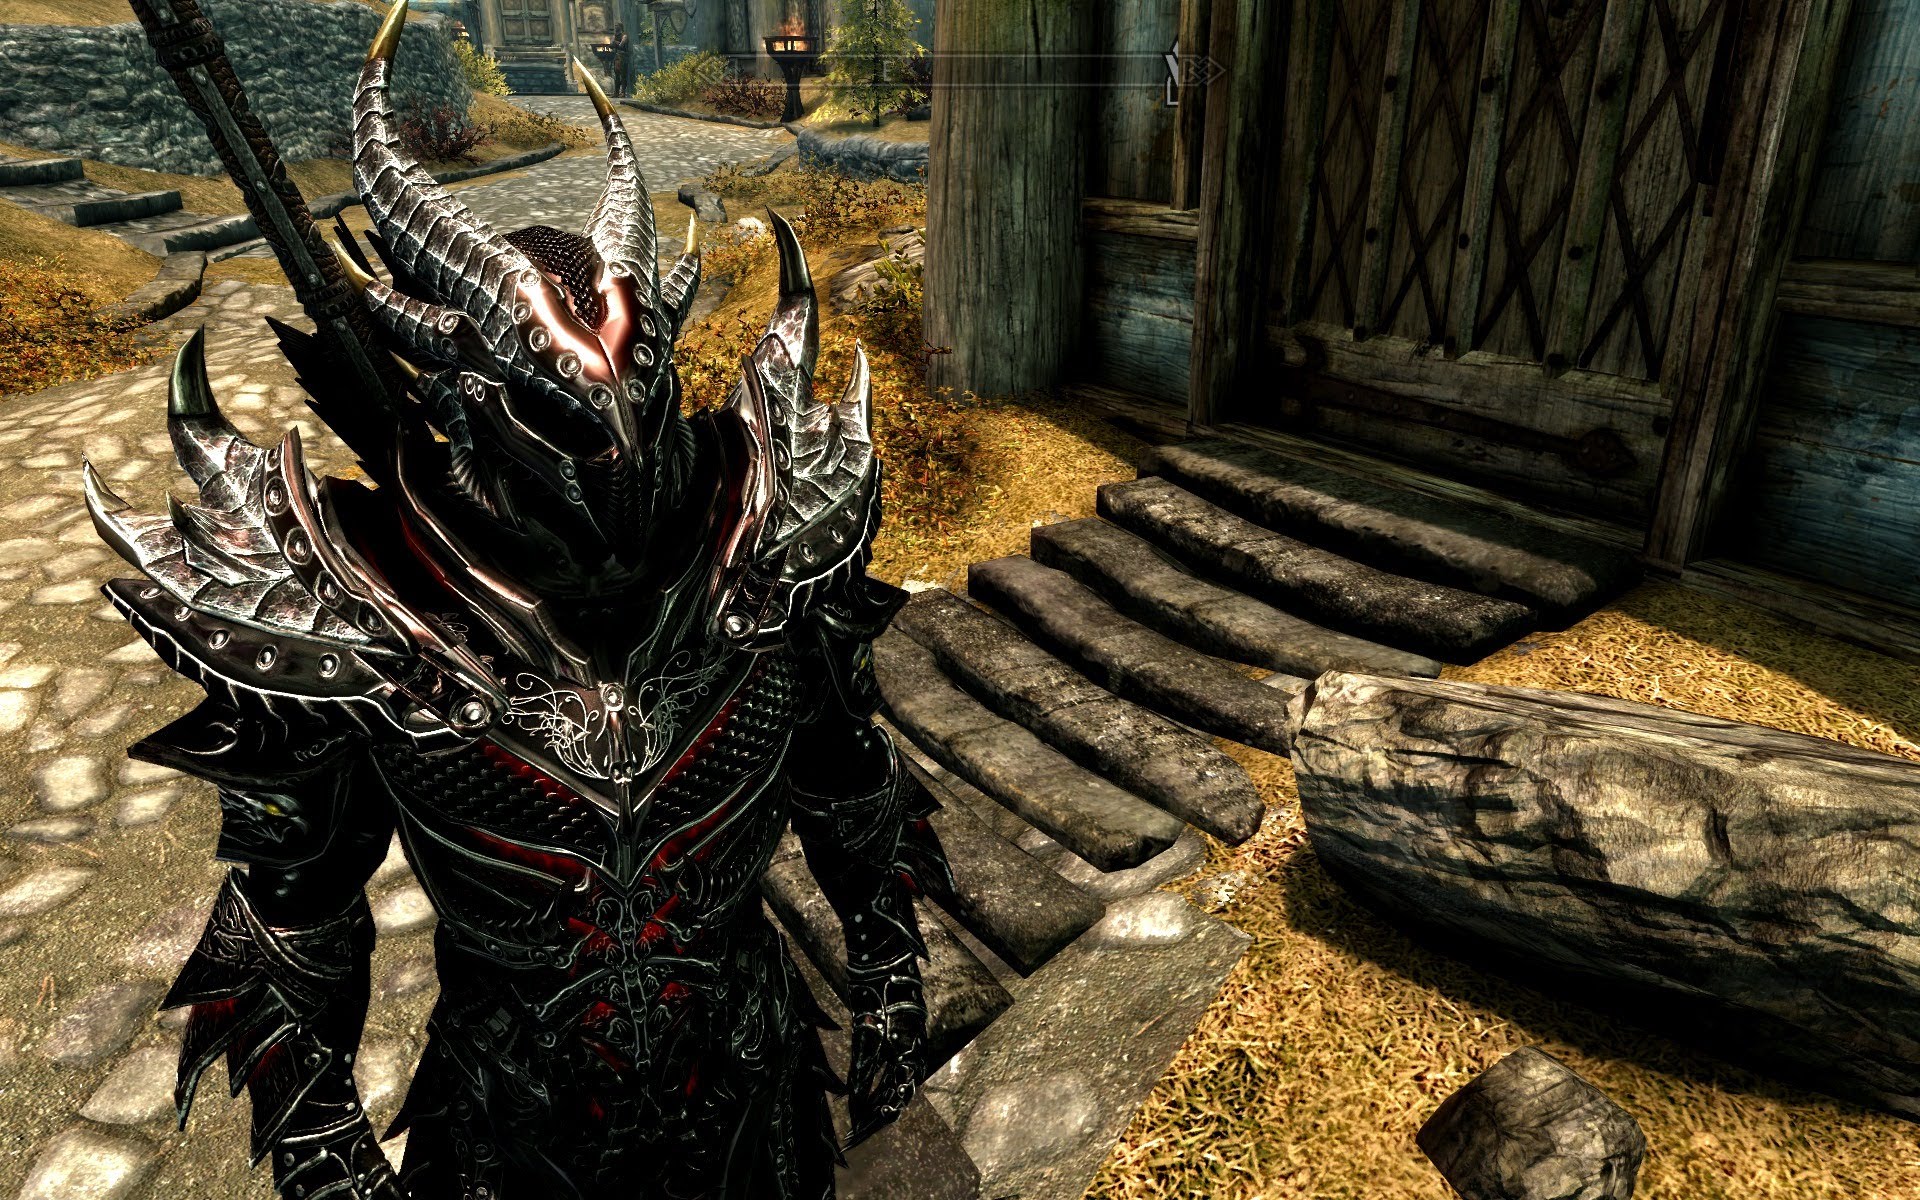 where can i find dragon armor in skyrim